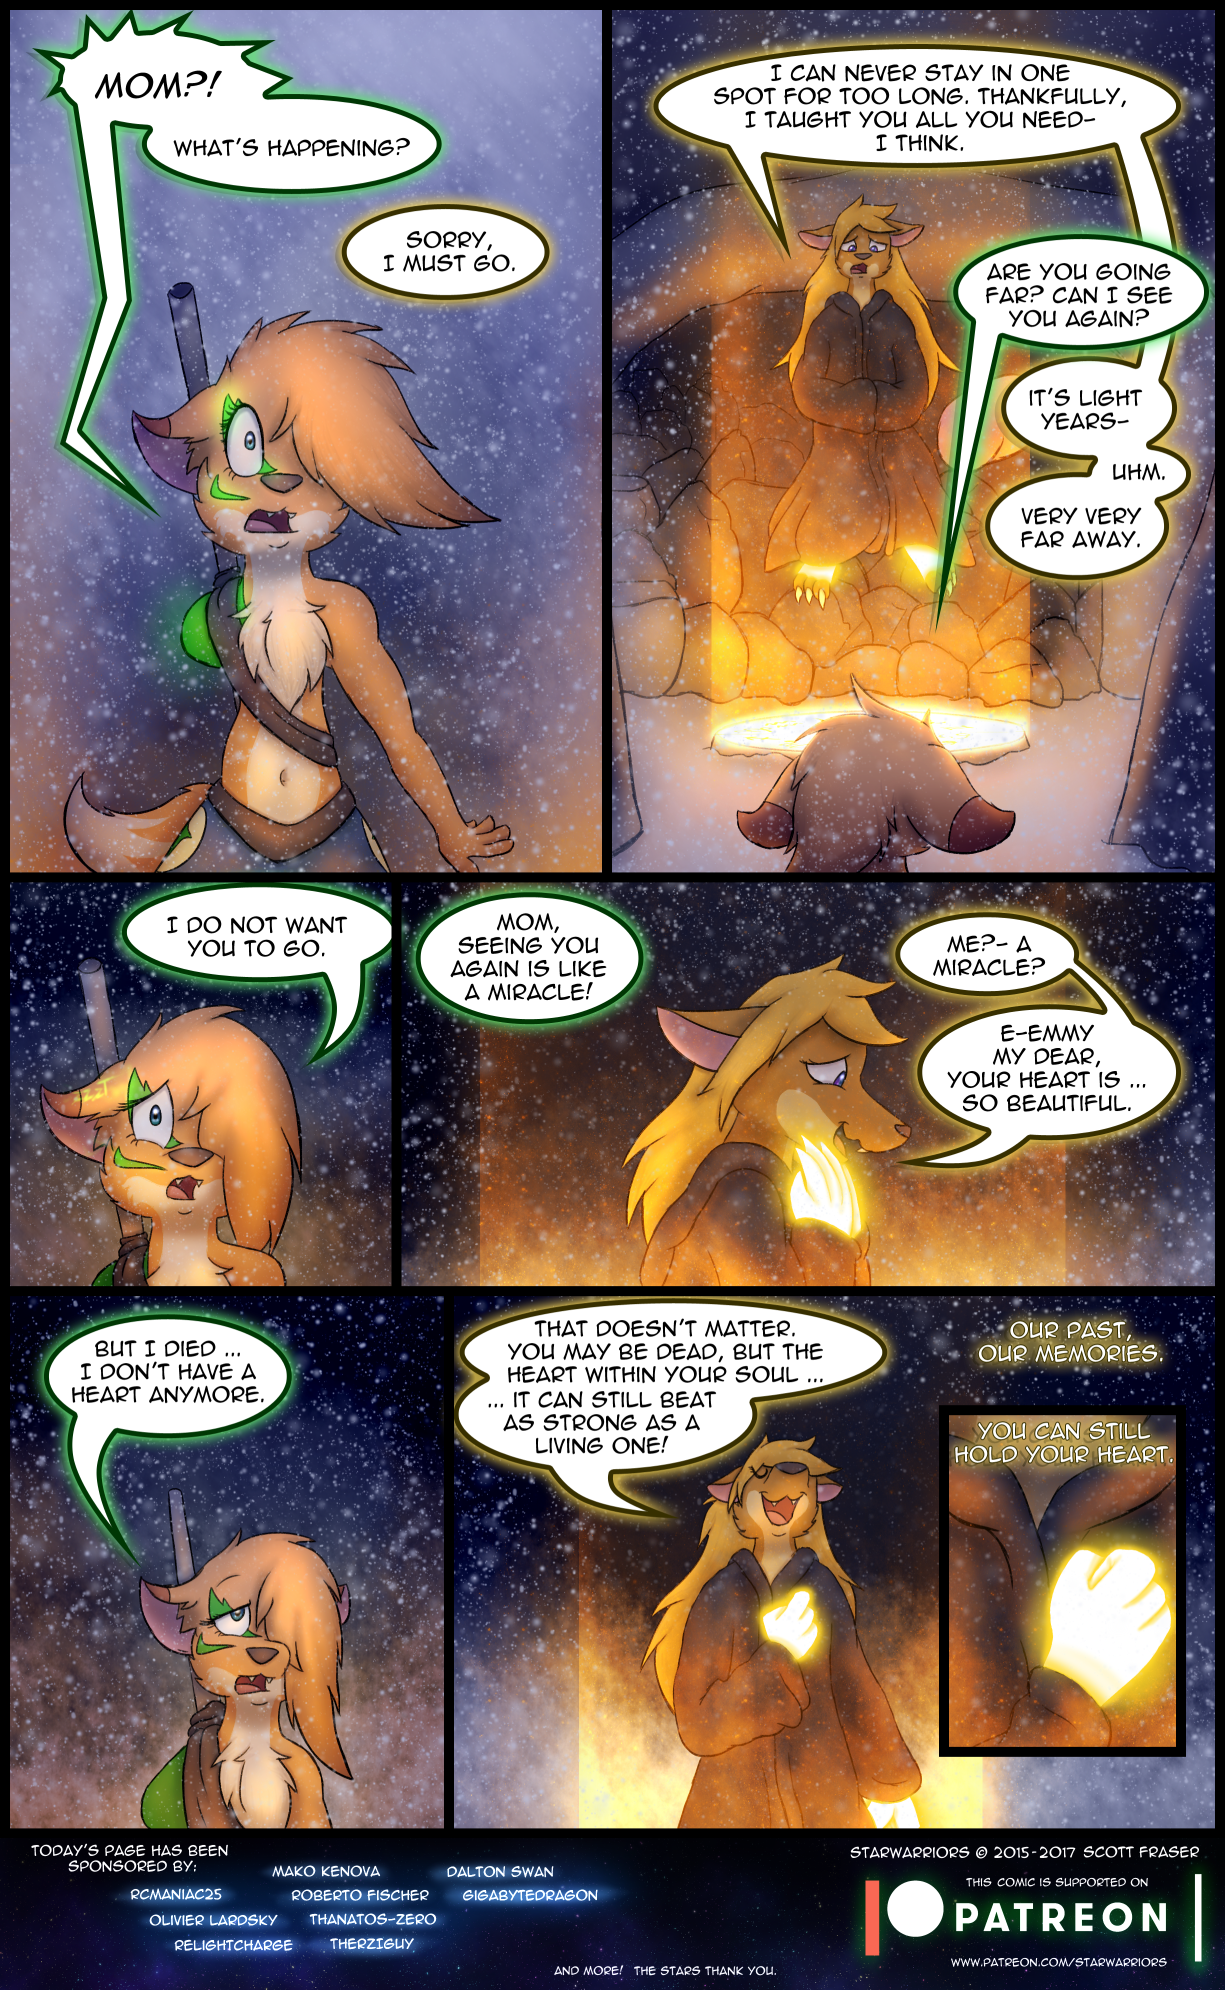 Ch3 Page 13 – Hold Your Heart